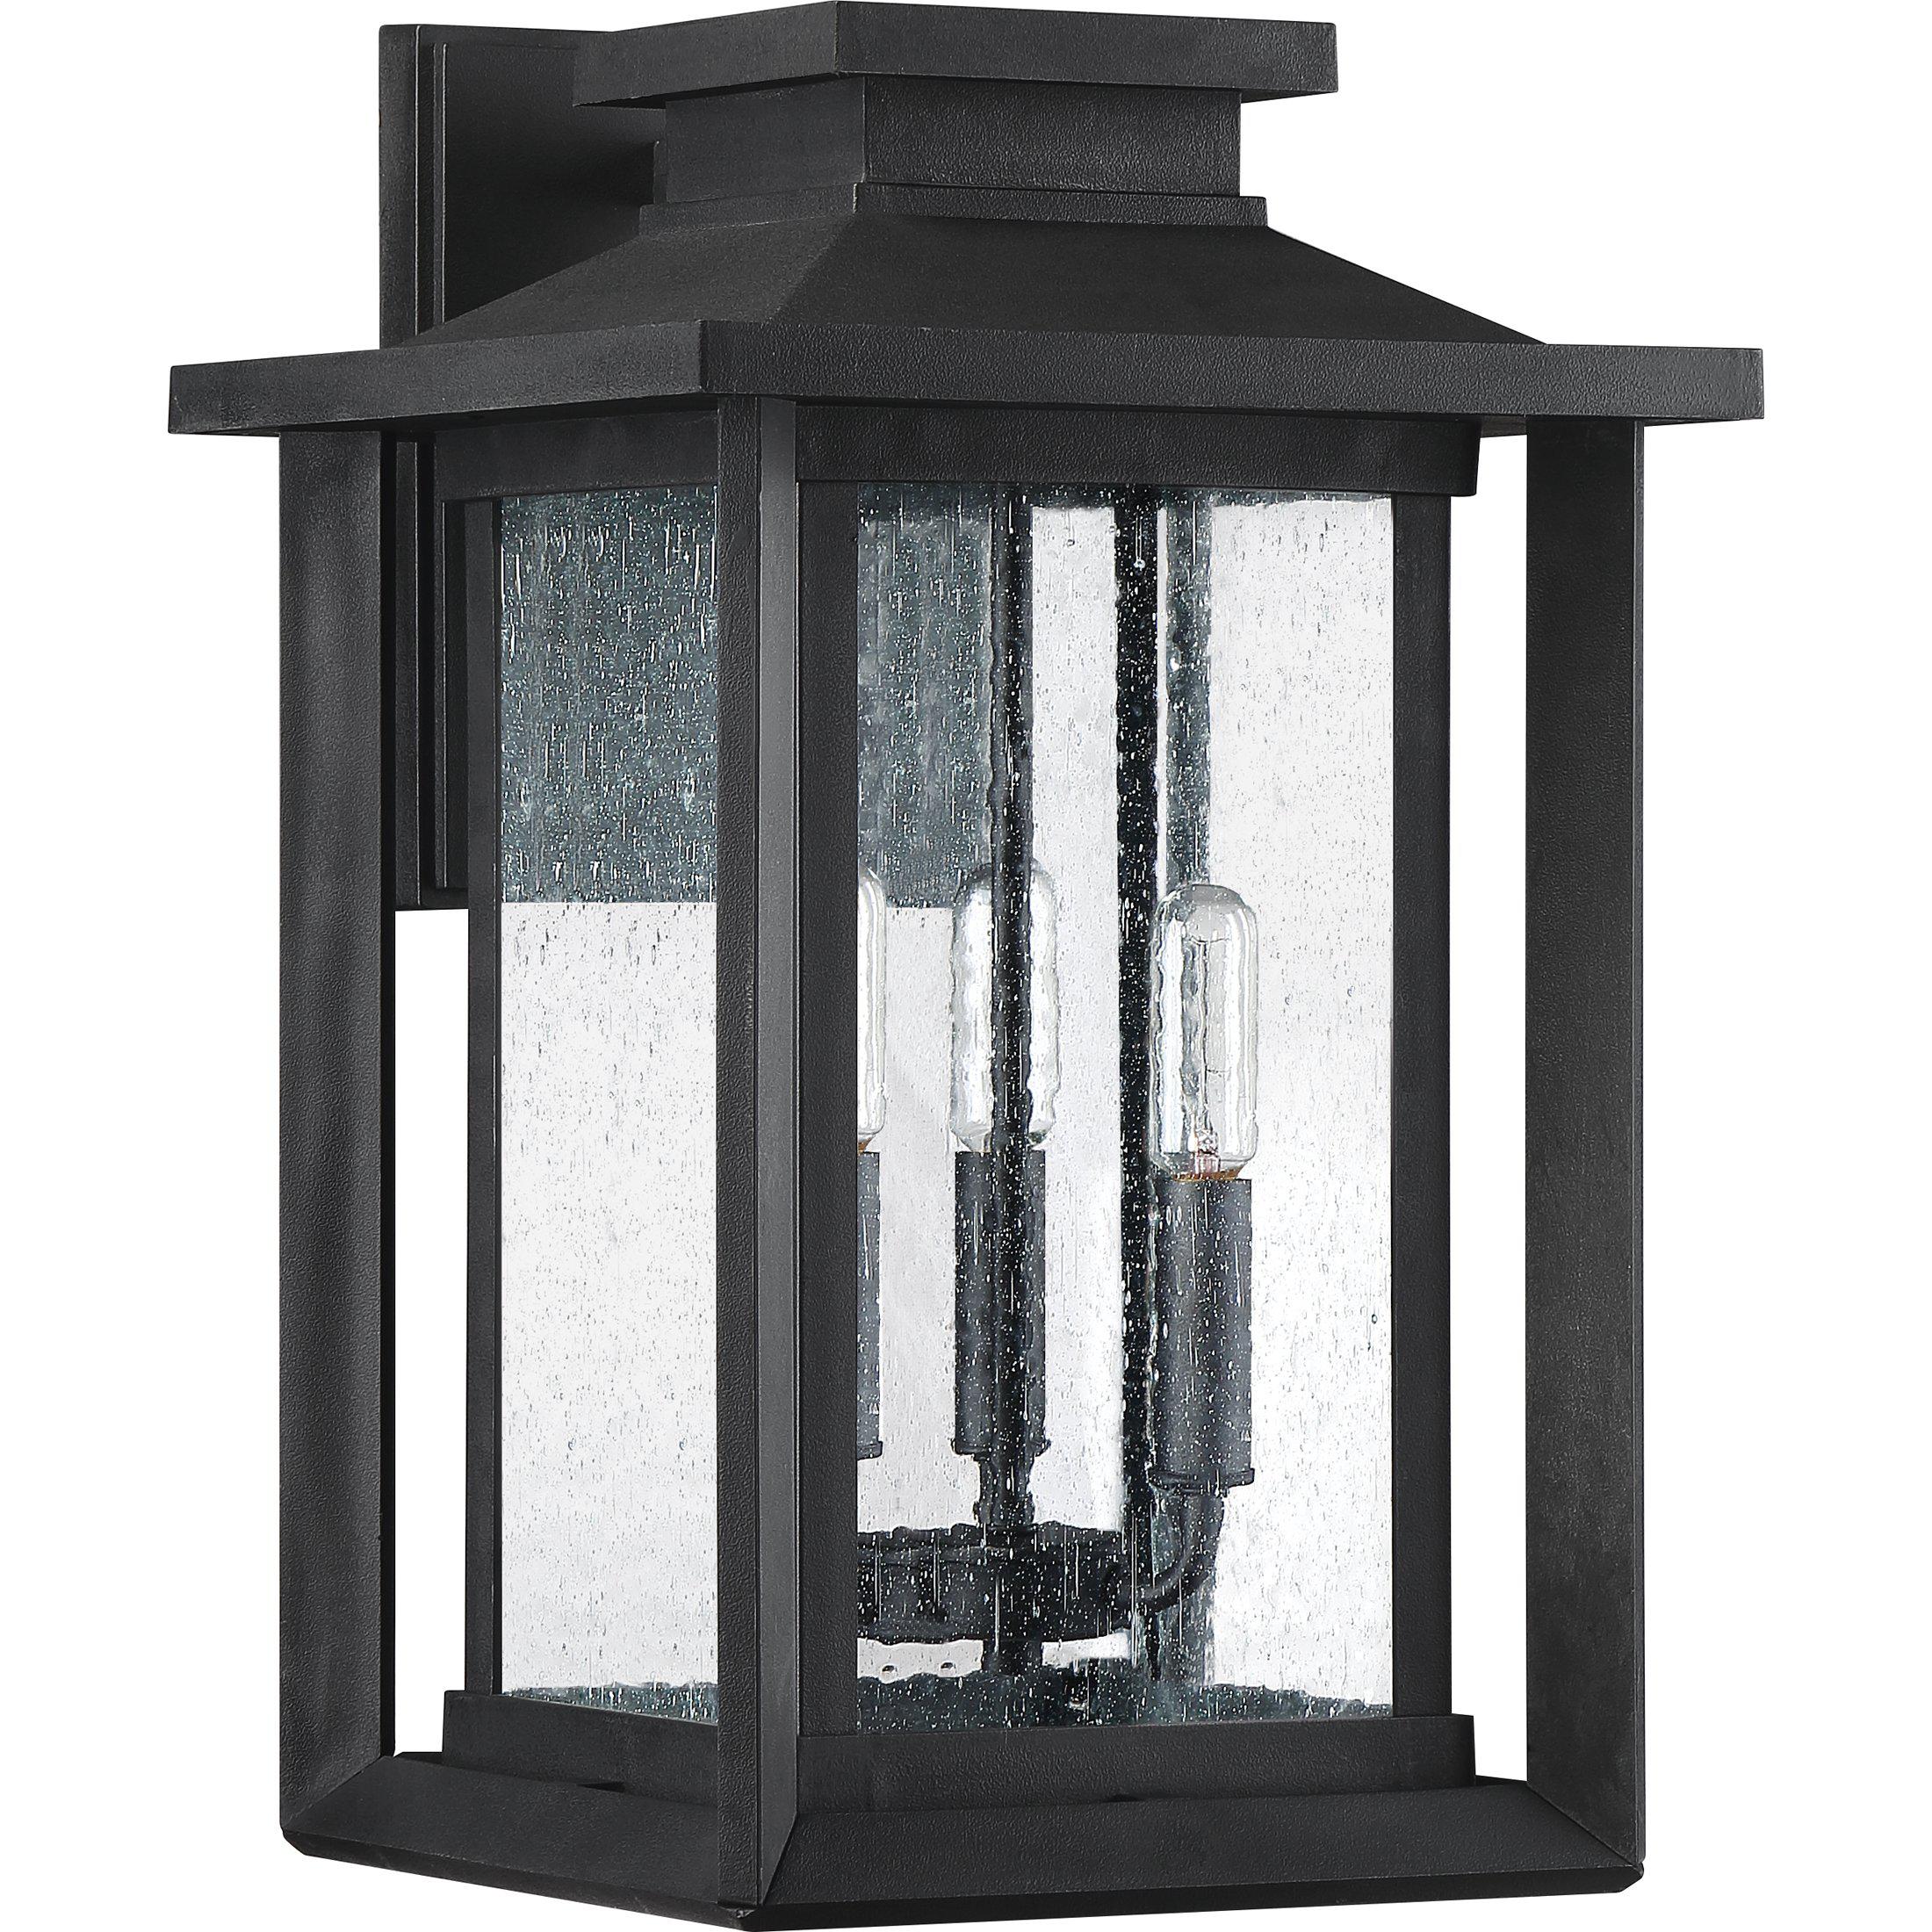 Quoizel  Wakefield Outdoor Lantern, Large Outdoor l Wall Quoizel   